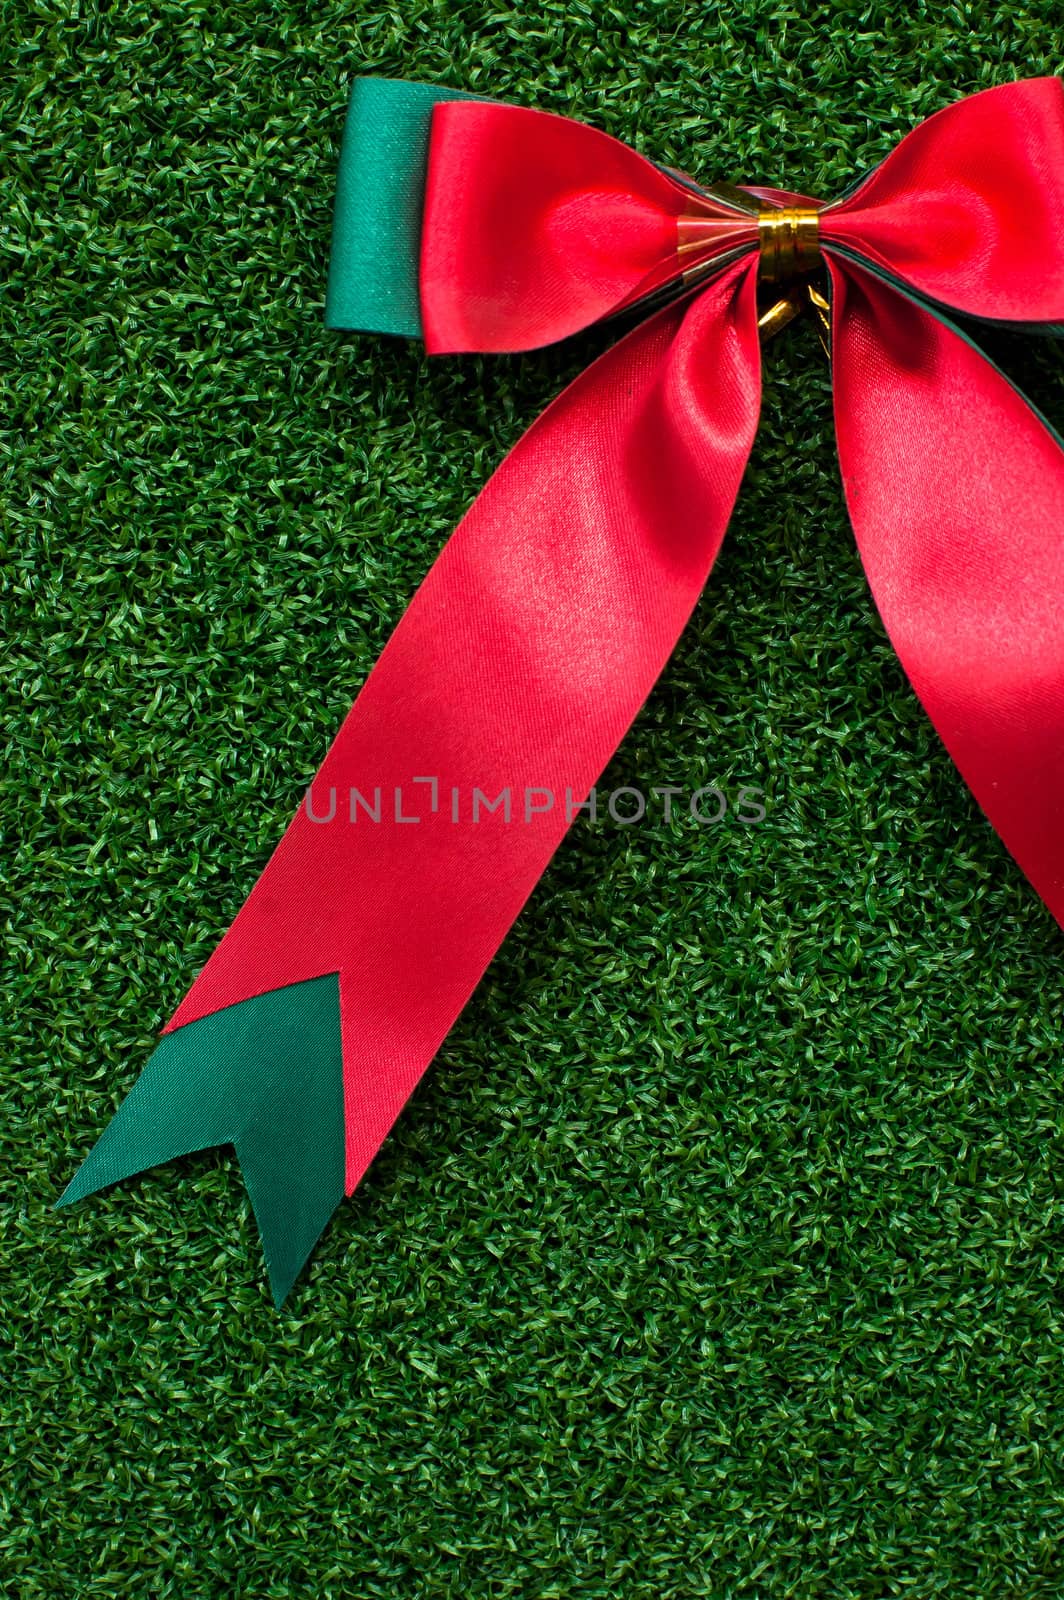 Red Bow on green grass